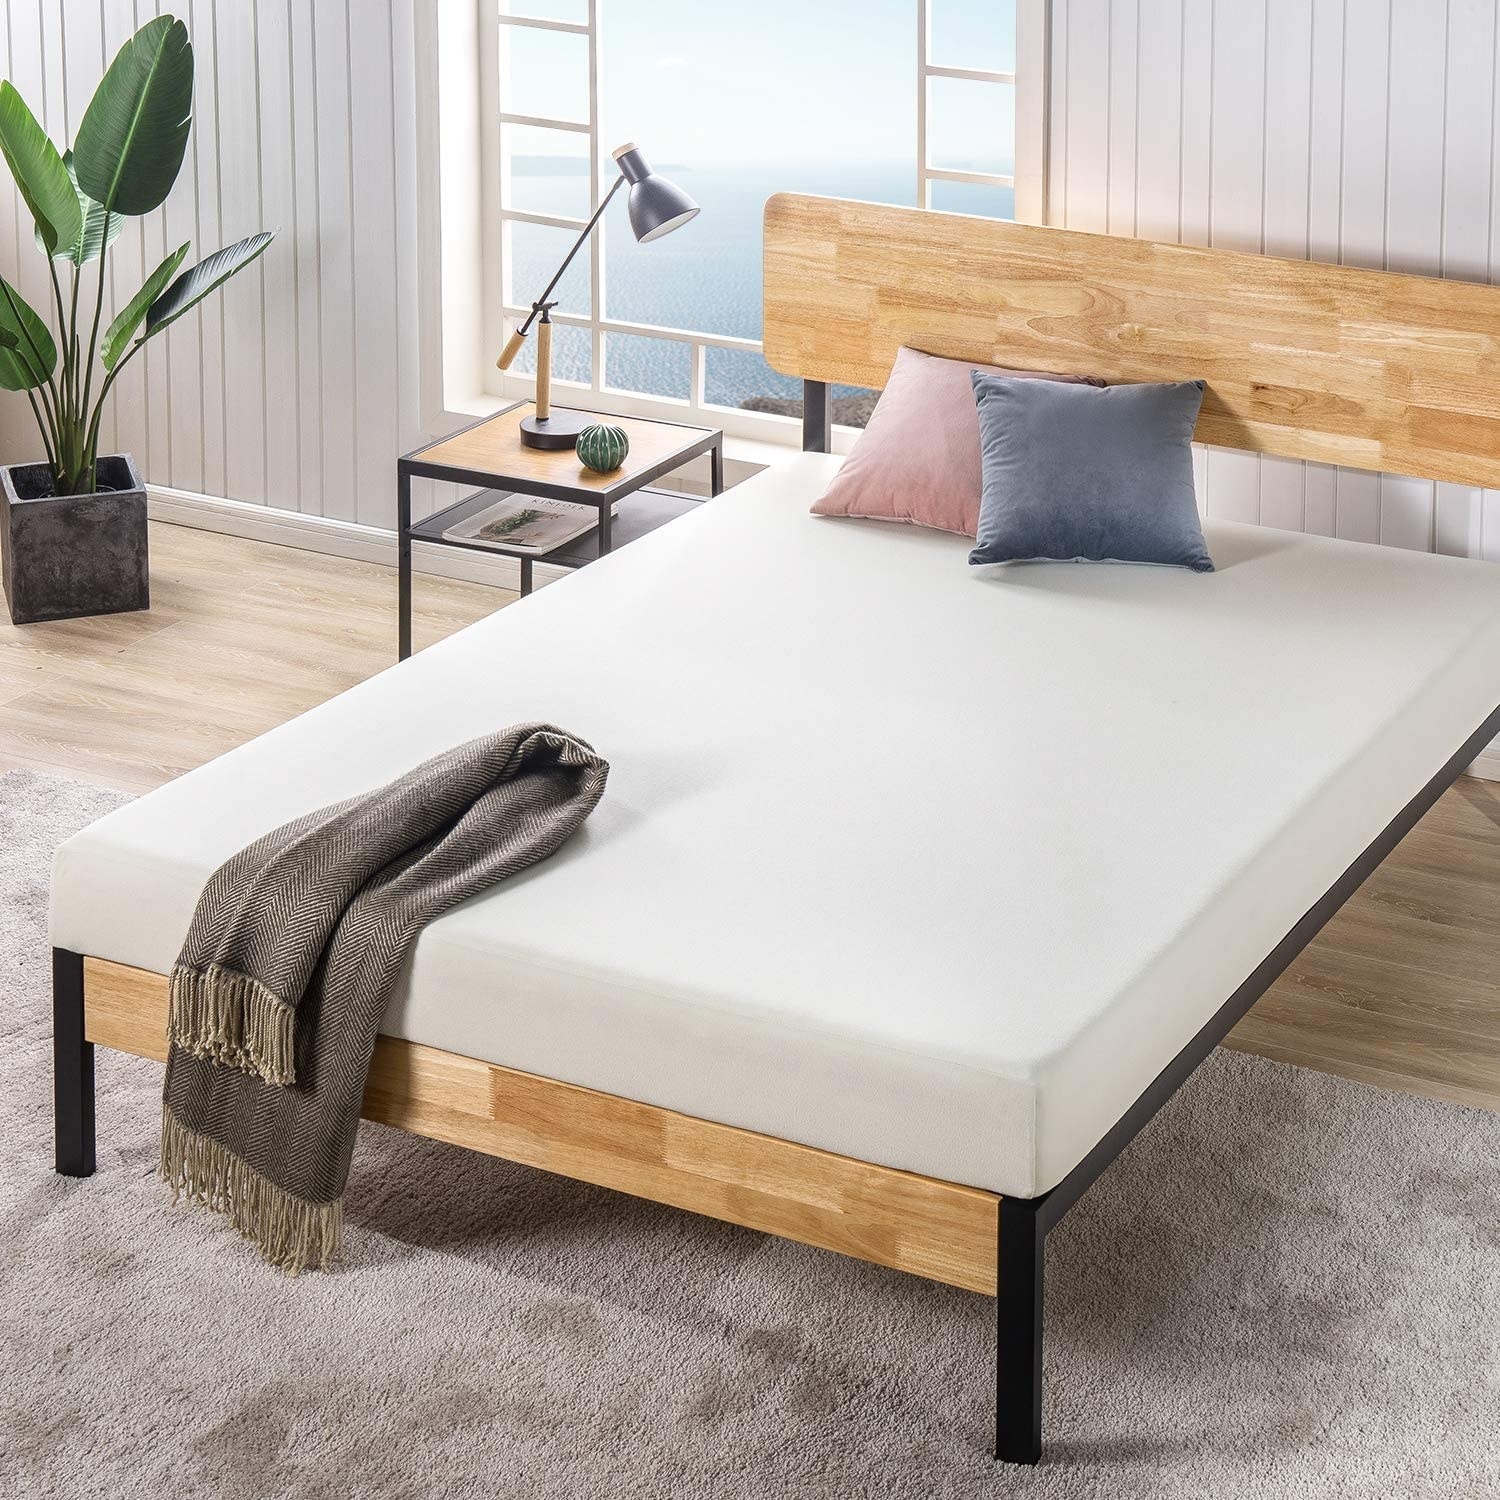 The mattress on a bed frame in a bedroom